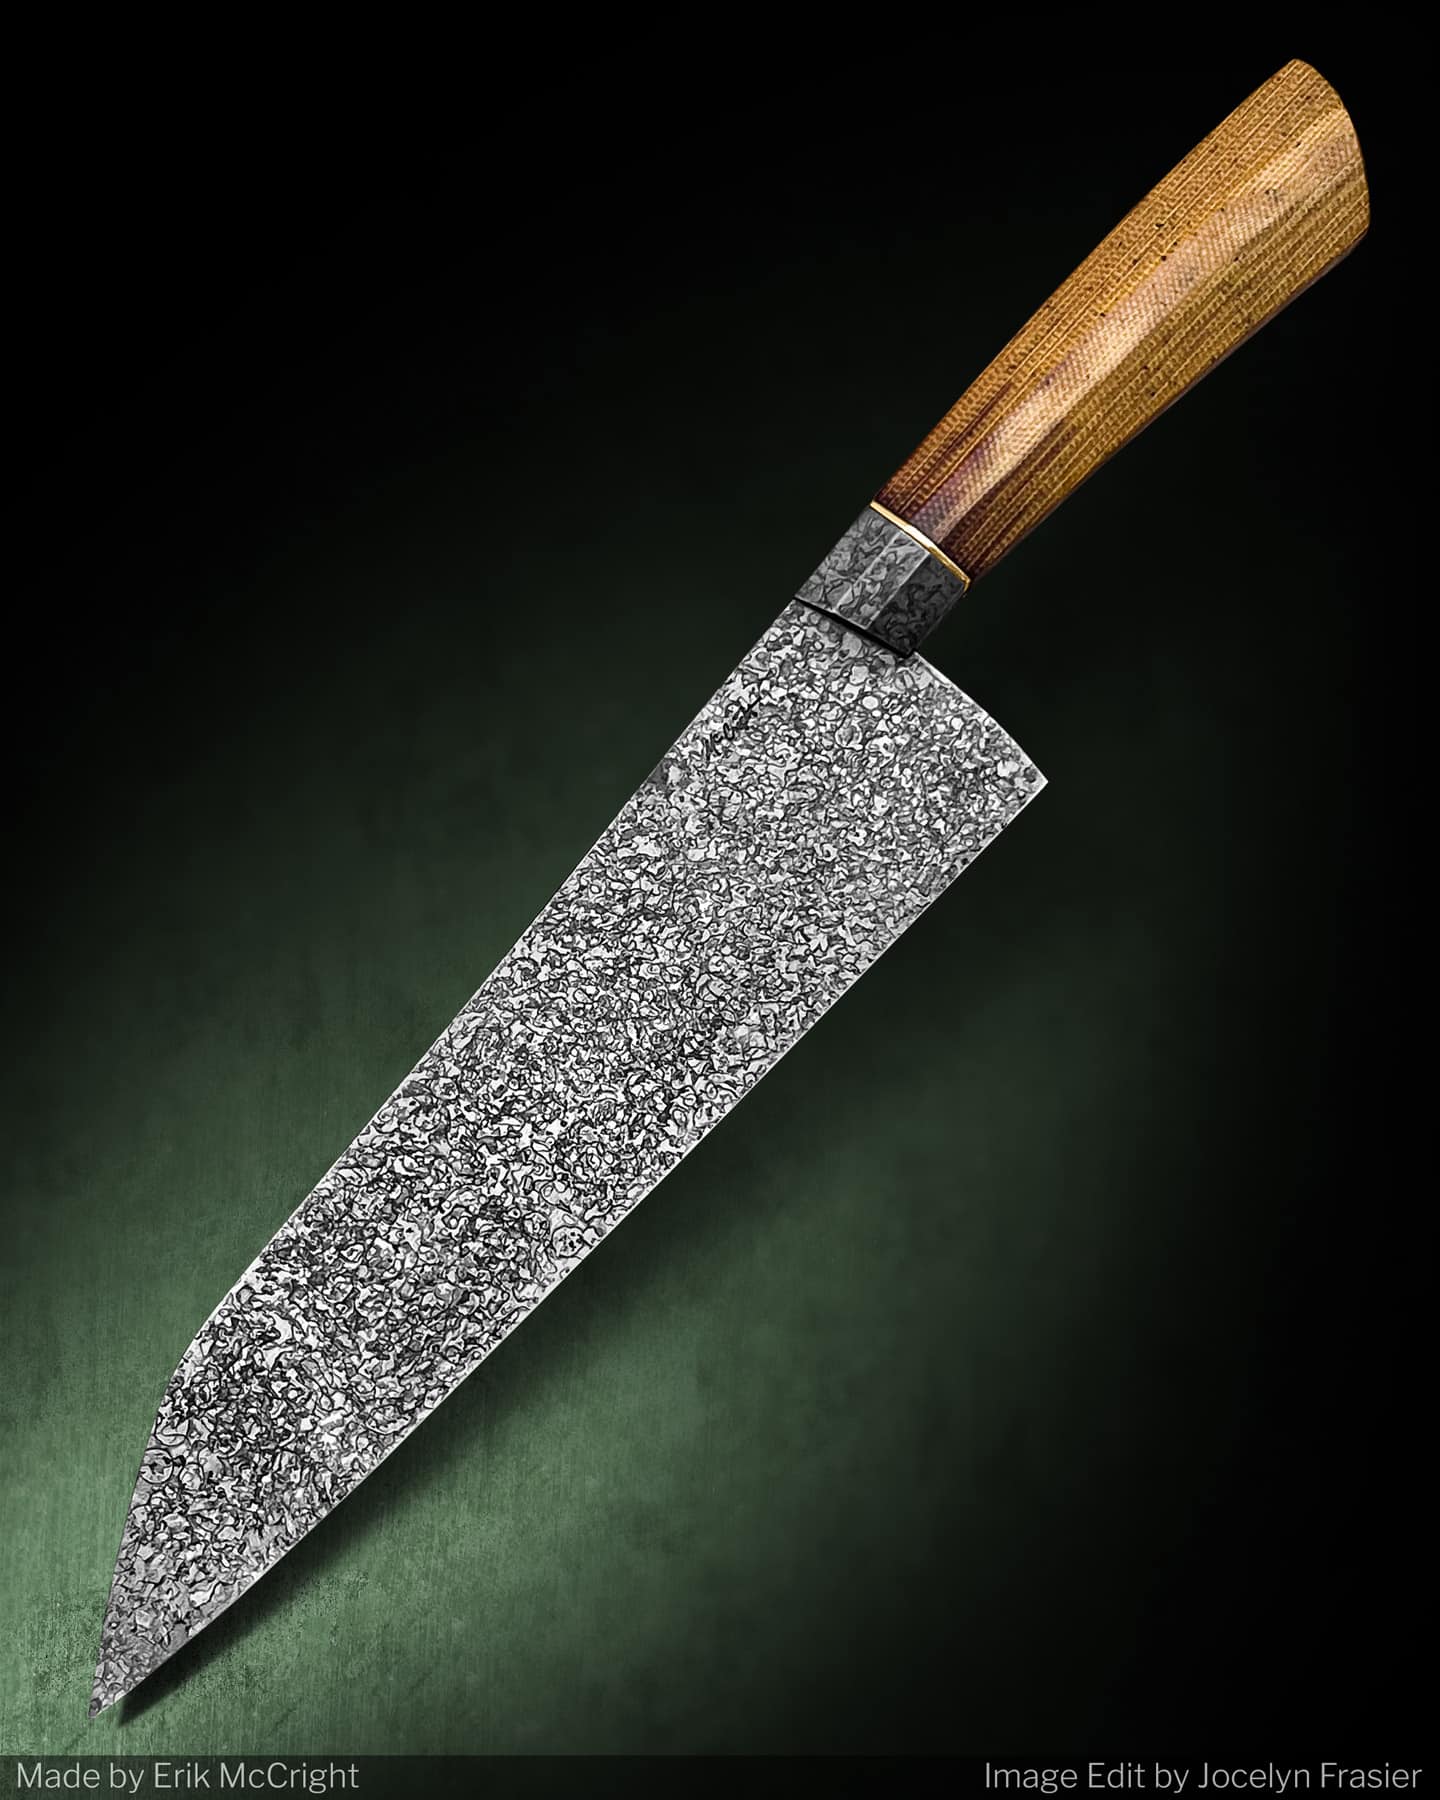 Erik McCright makes both outdoor knives and kitchen knives like the chef knife pictured here. 